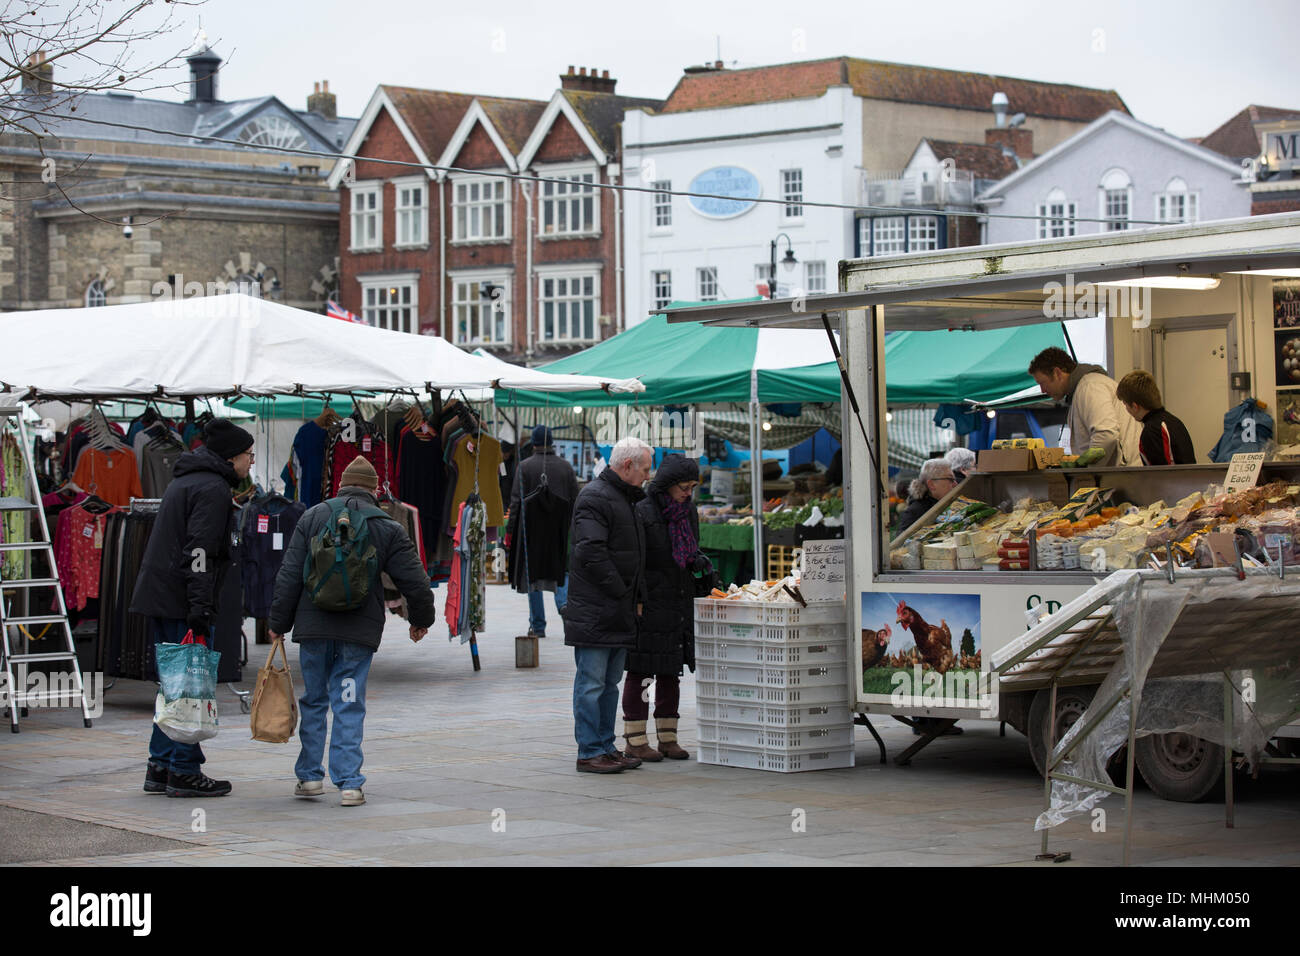 Salisbury city centre, the area where Sergei Skripal the former Russian double agent was poisoned with novichok in Wiltshire UK Stock Photo